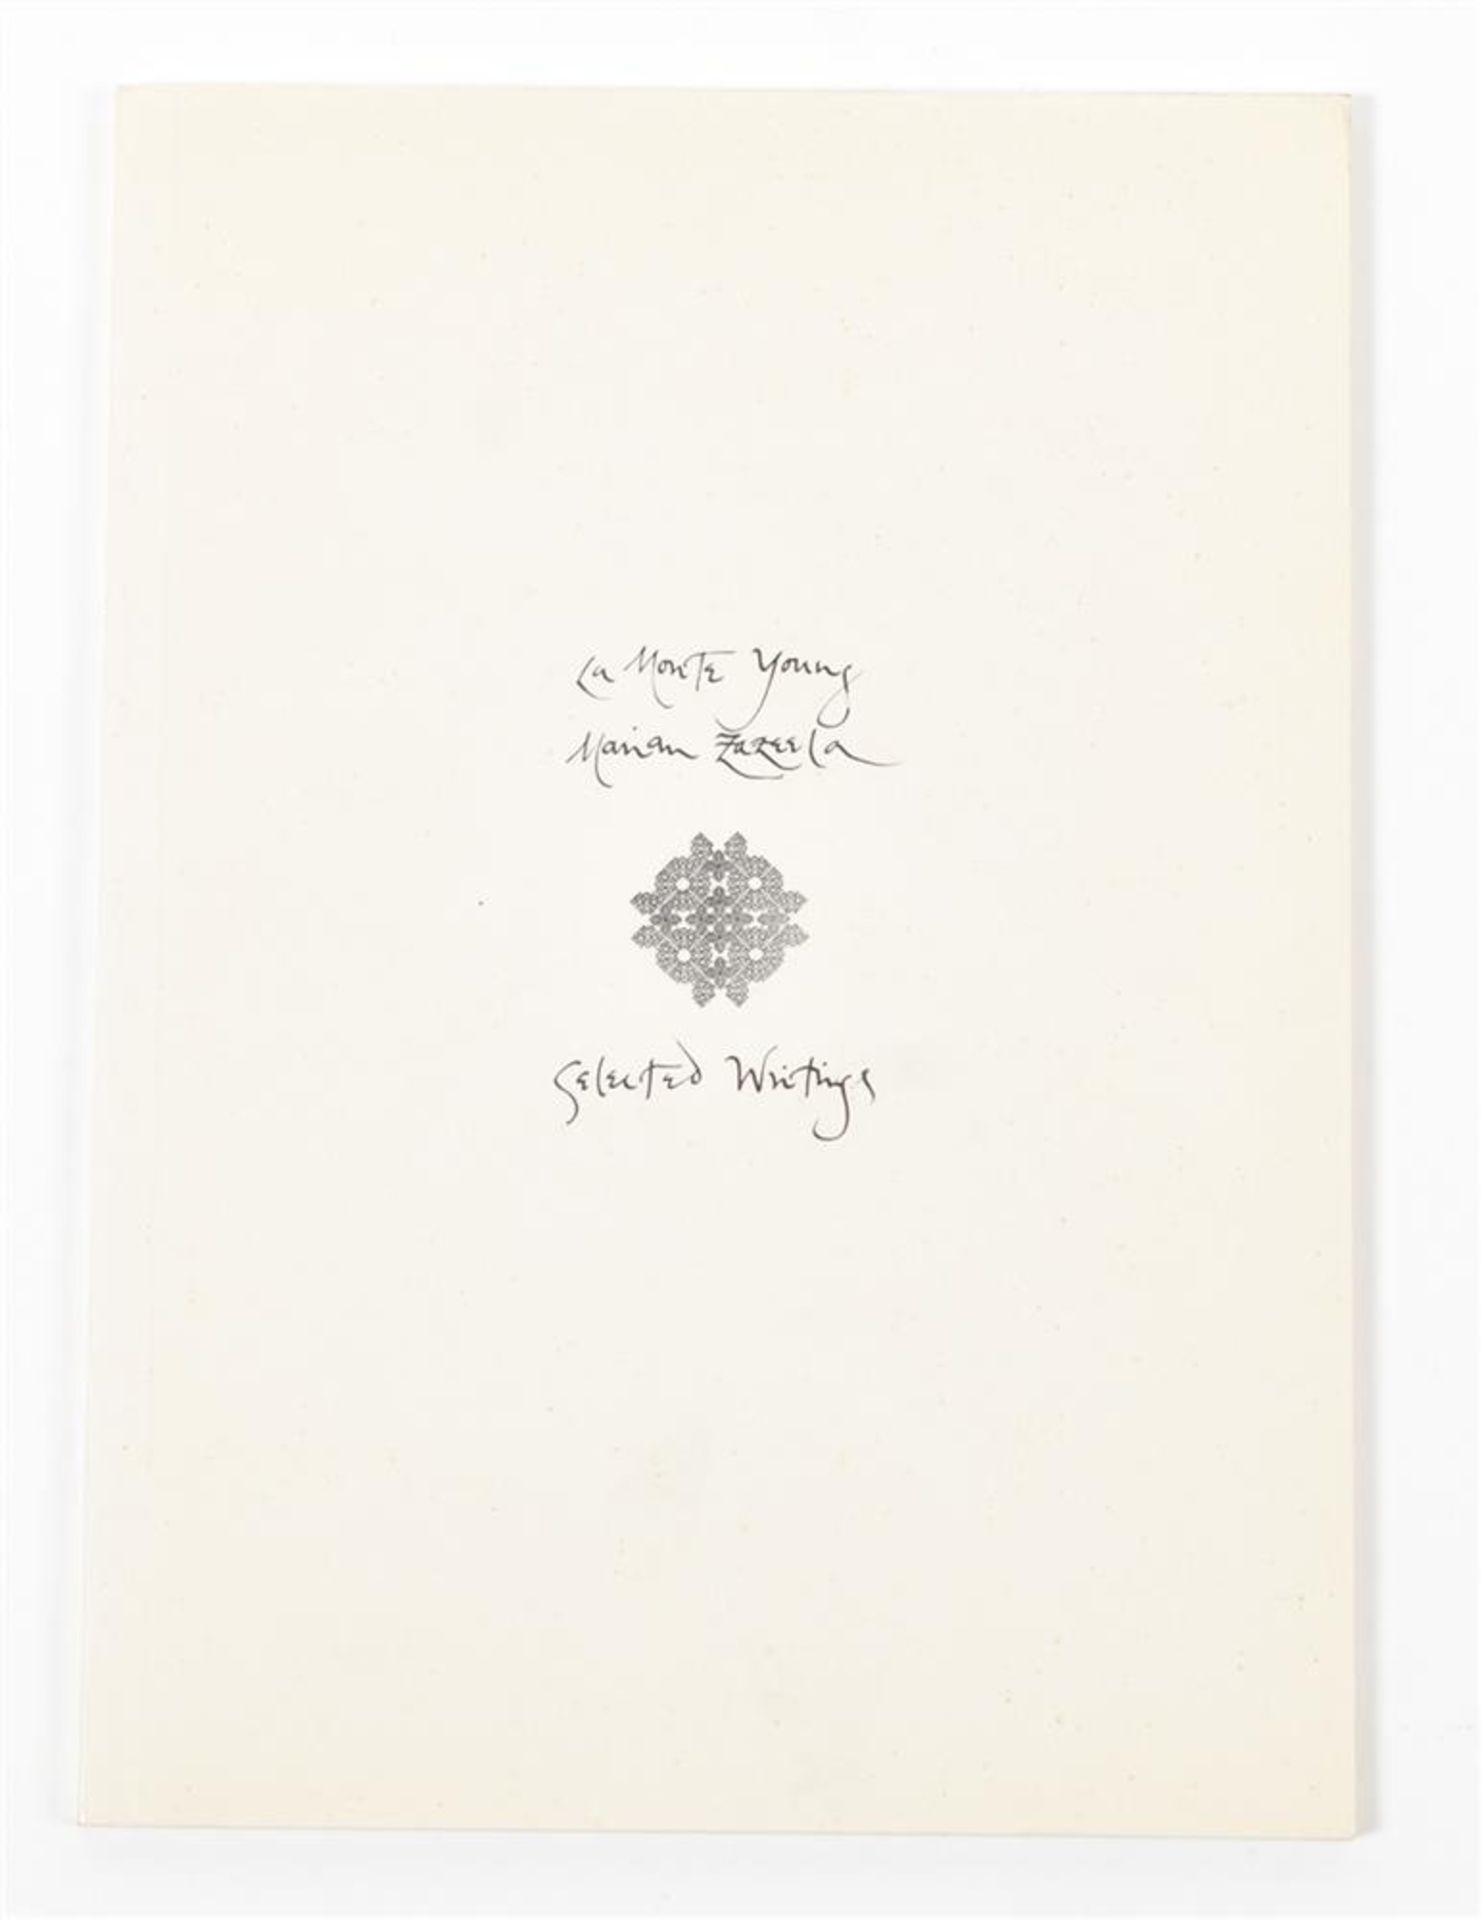 La Monte Young and Marian Zazeela, Selected Writings. Signed and numbered first edition, rare